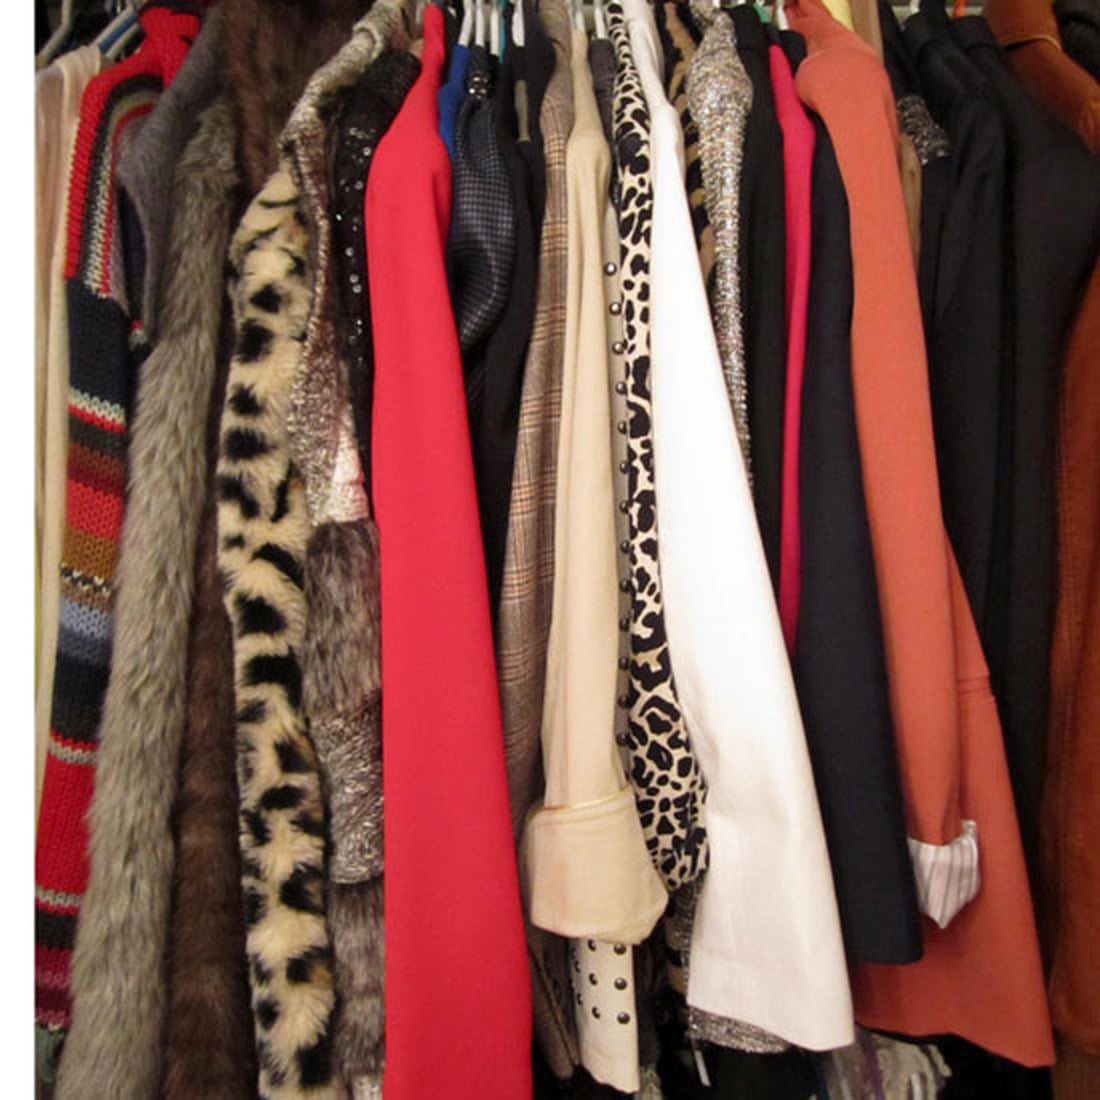 How to Organize Your Closet For Fall and Winter | POPSUGAR Fashion